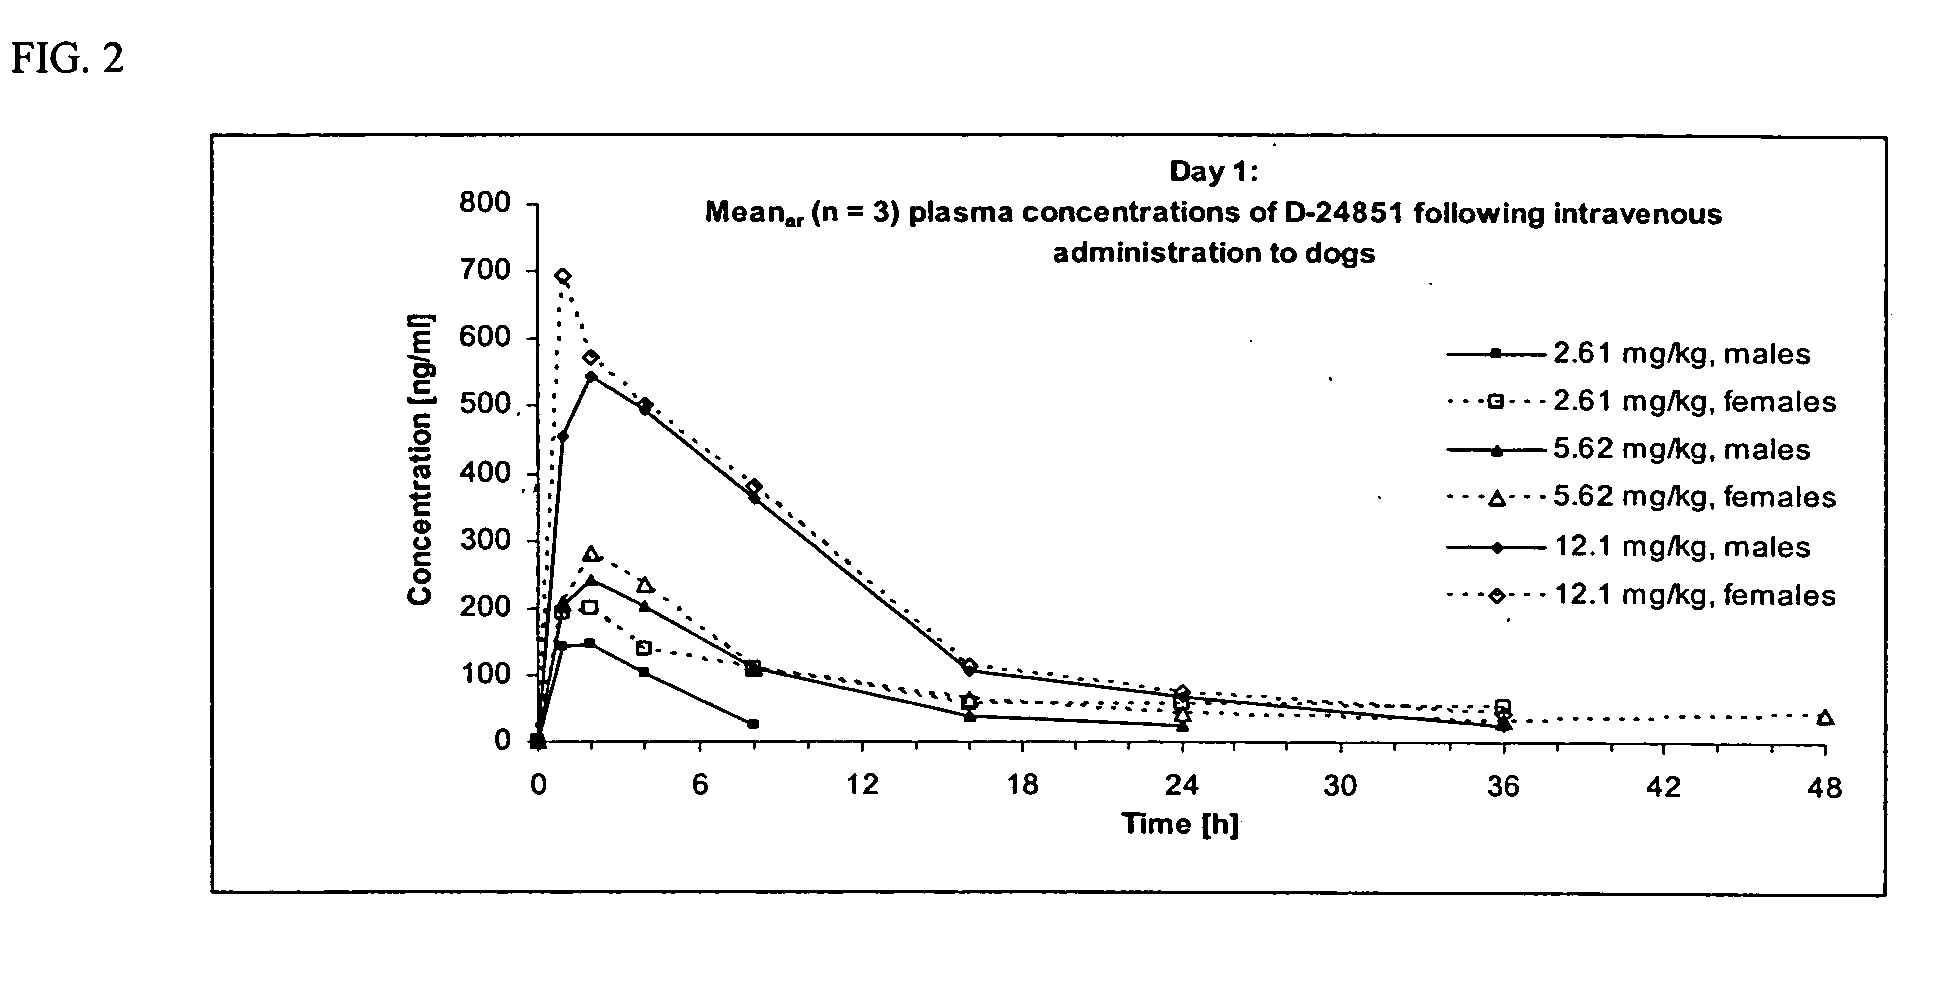 Nanoparticulate compositions of tubulin inhibitor compounds